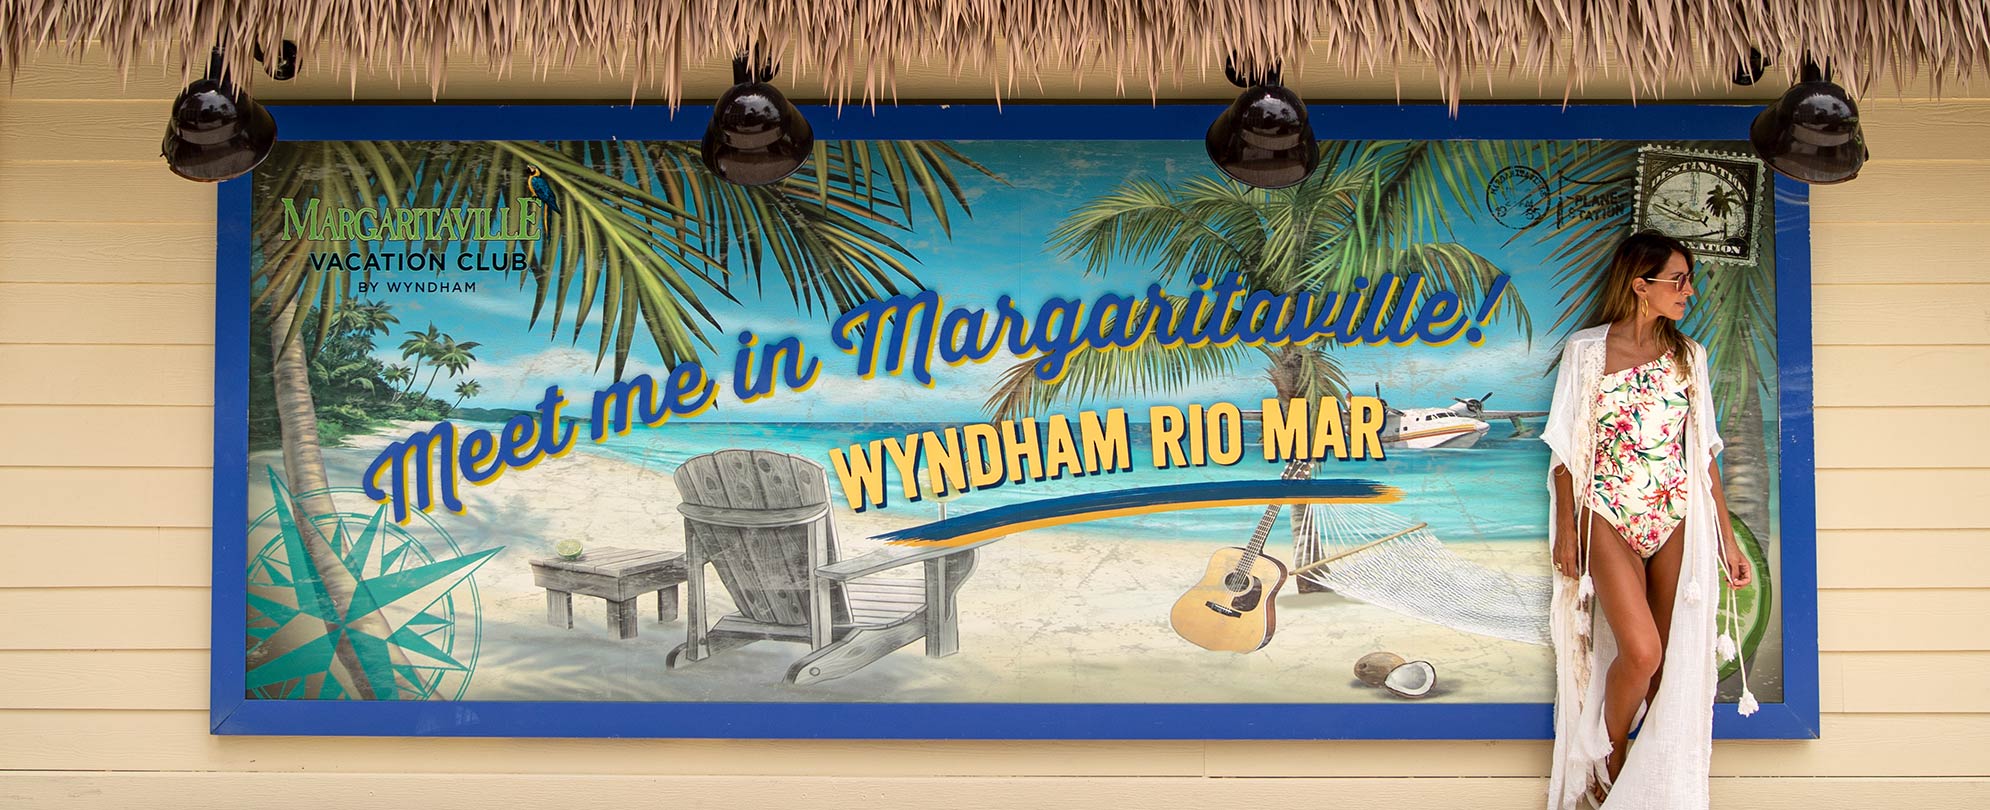 Woman standing by of sign that reads "Meet Me in Margaritaville. Wyndham Rio Mar" at a Margaritaville Vacation Club resort.